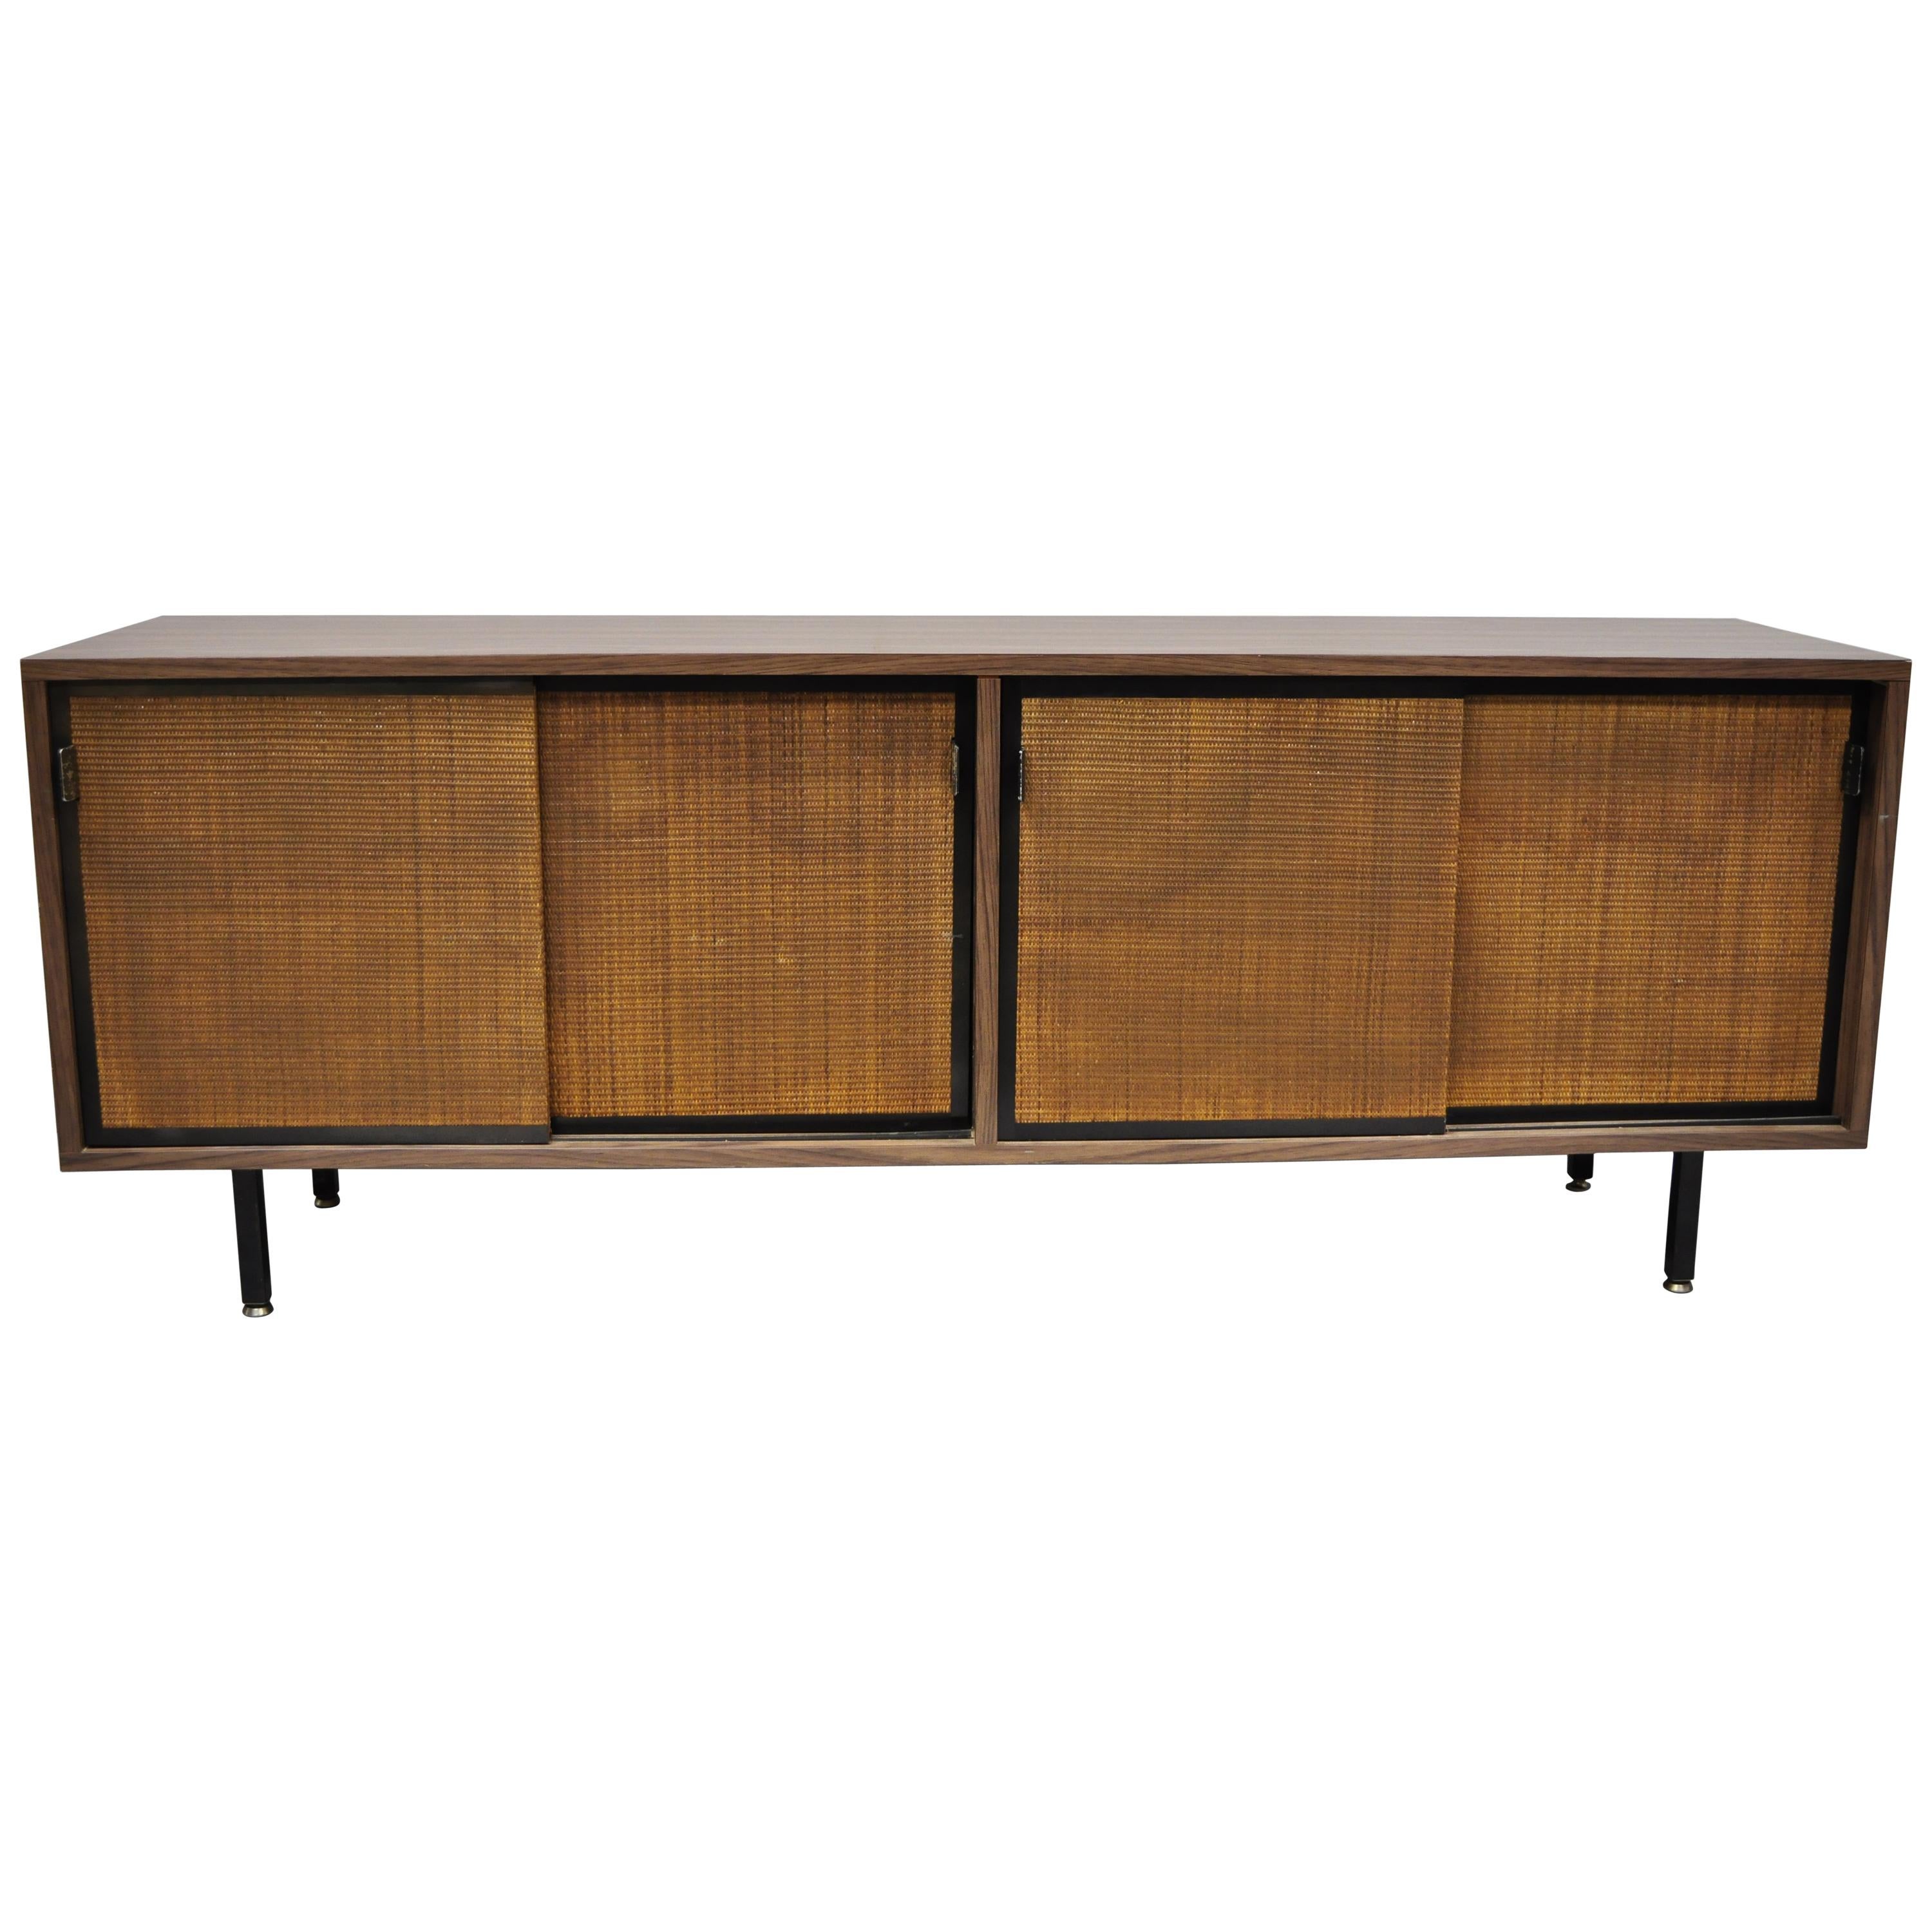 Vintage Mid-Century Modern Laminate Formica Case Credenza Cabinet Buffet For Sale